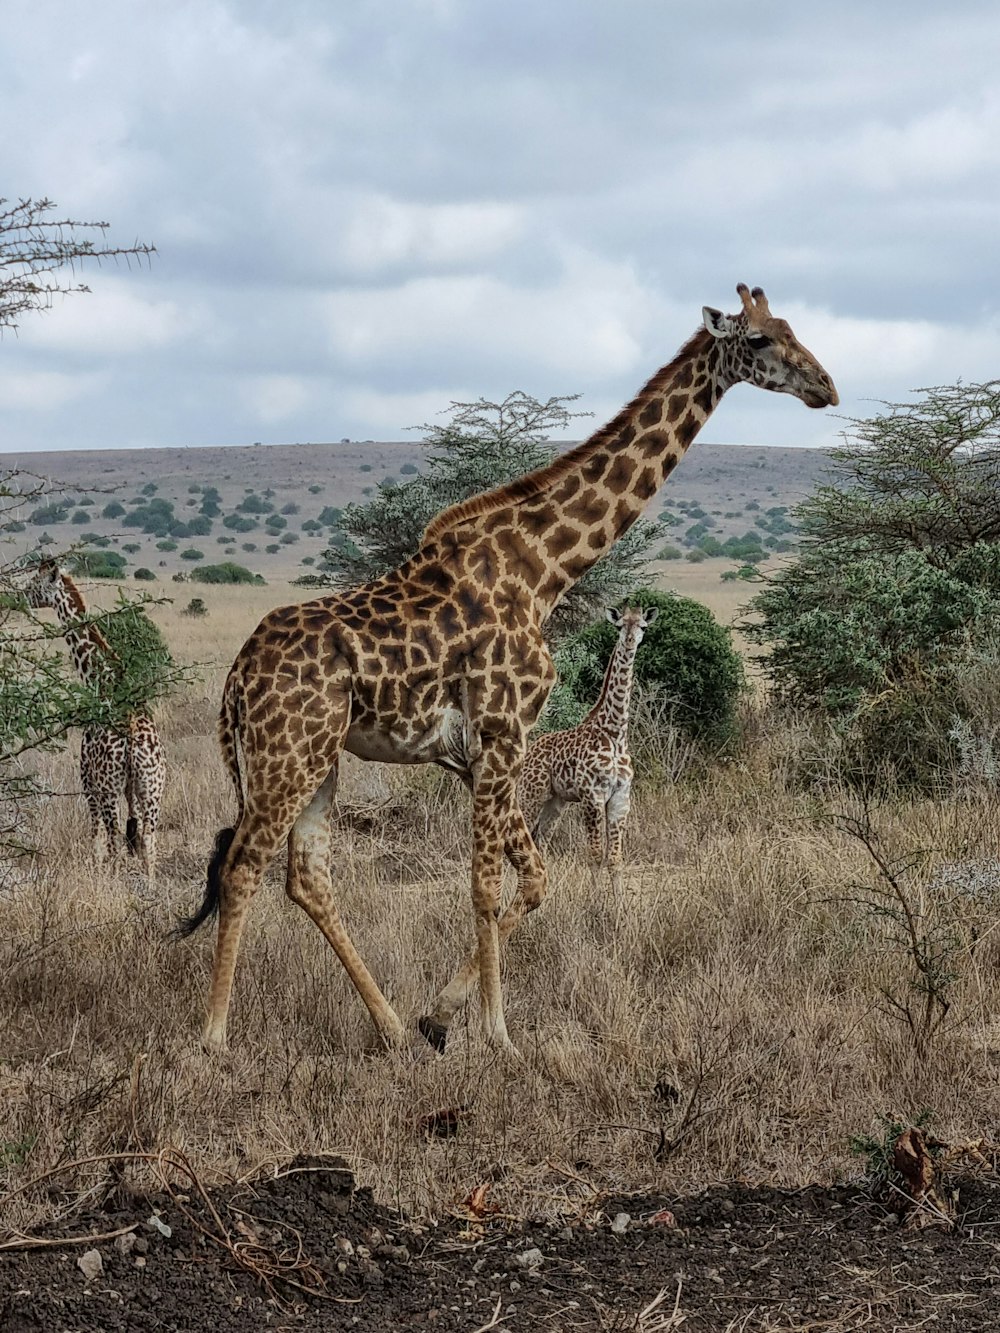 a giraffe walking in a field with other giraffes in the